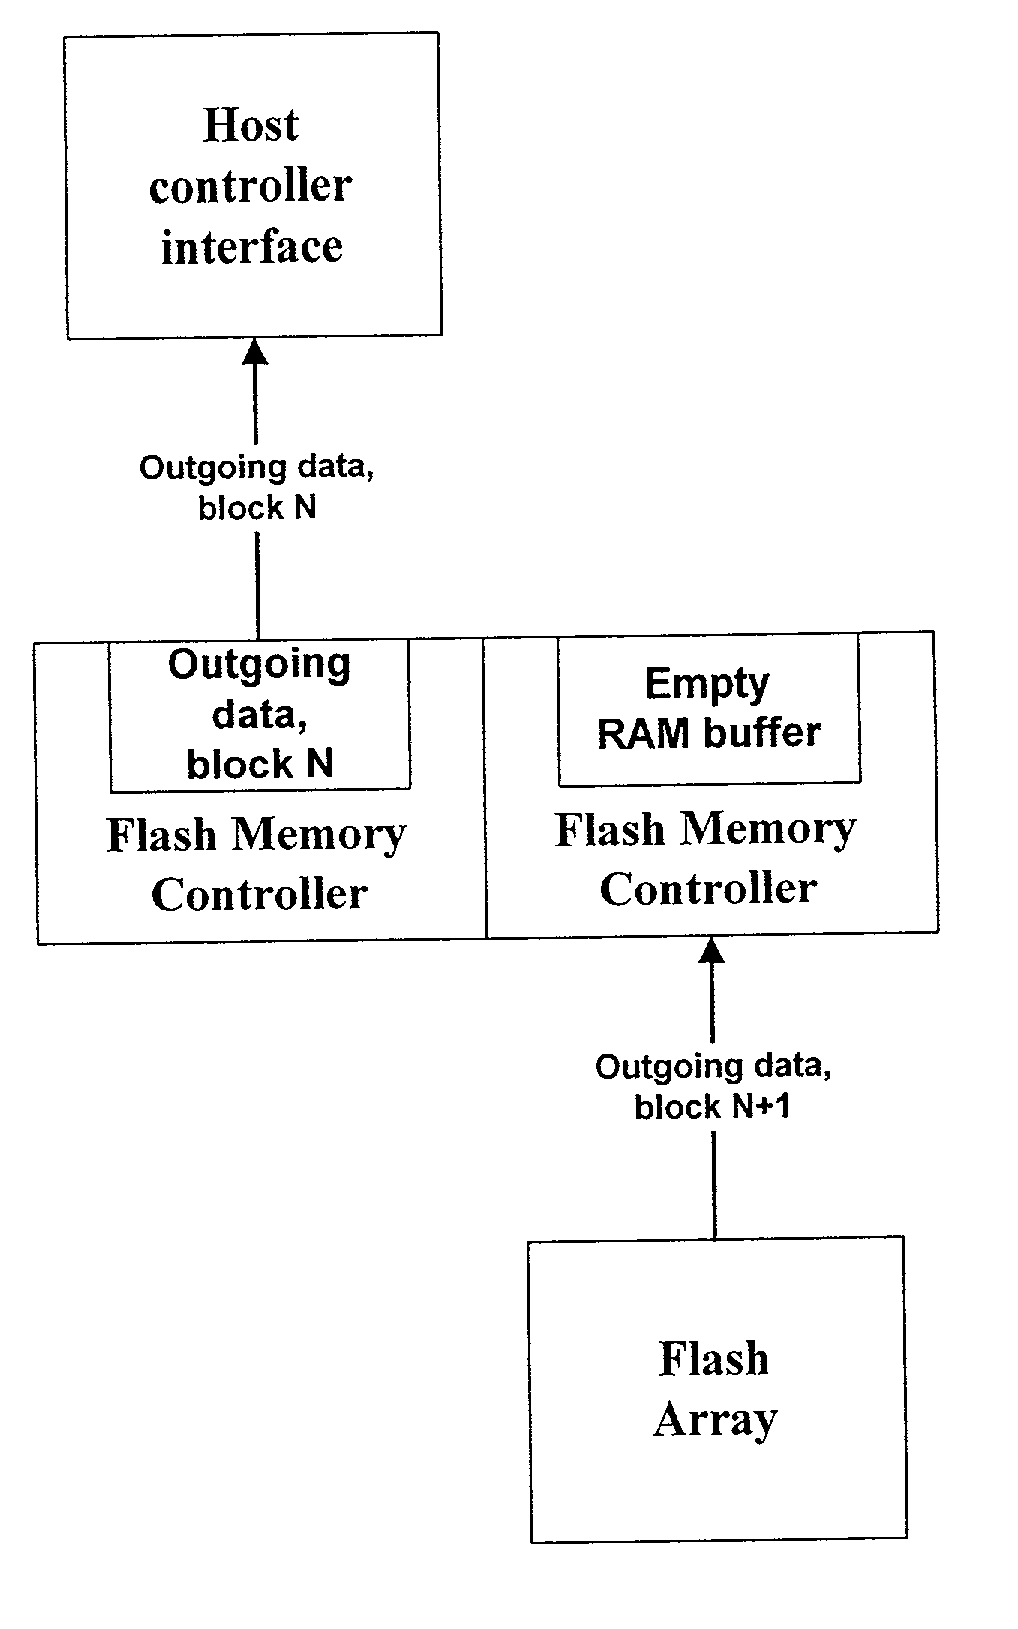 Method for using RAM buffers with multiple accesses in flash-based storage systems